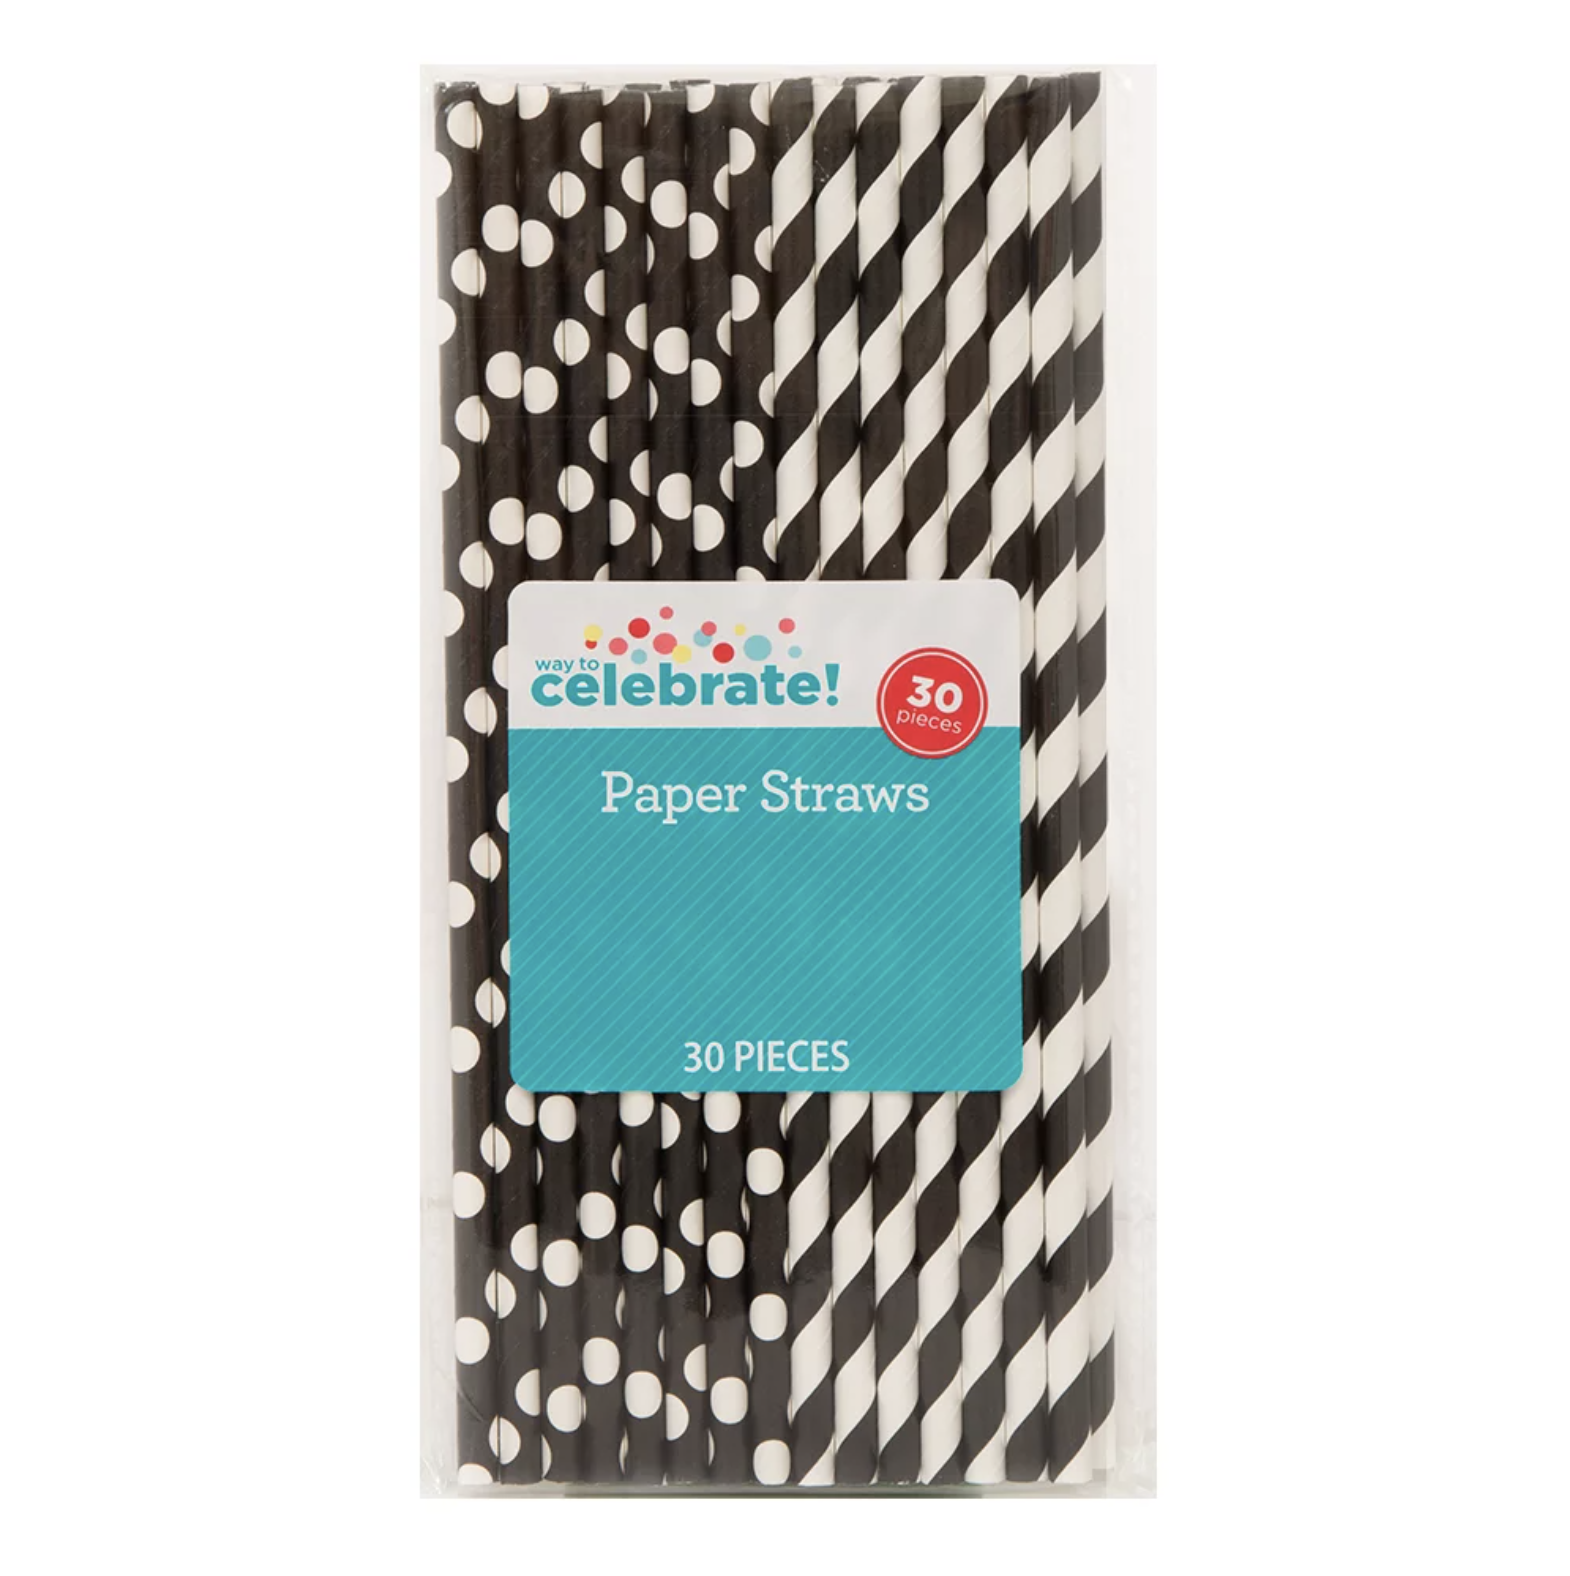 30-piece Way to Celebrate! polka-dotted and striped paper straws